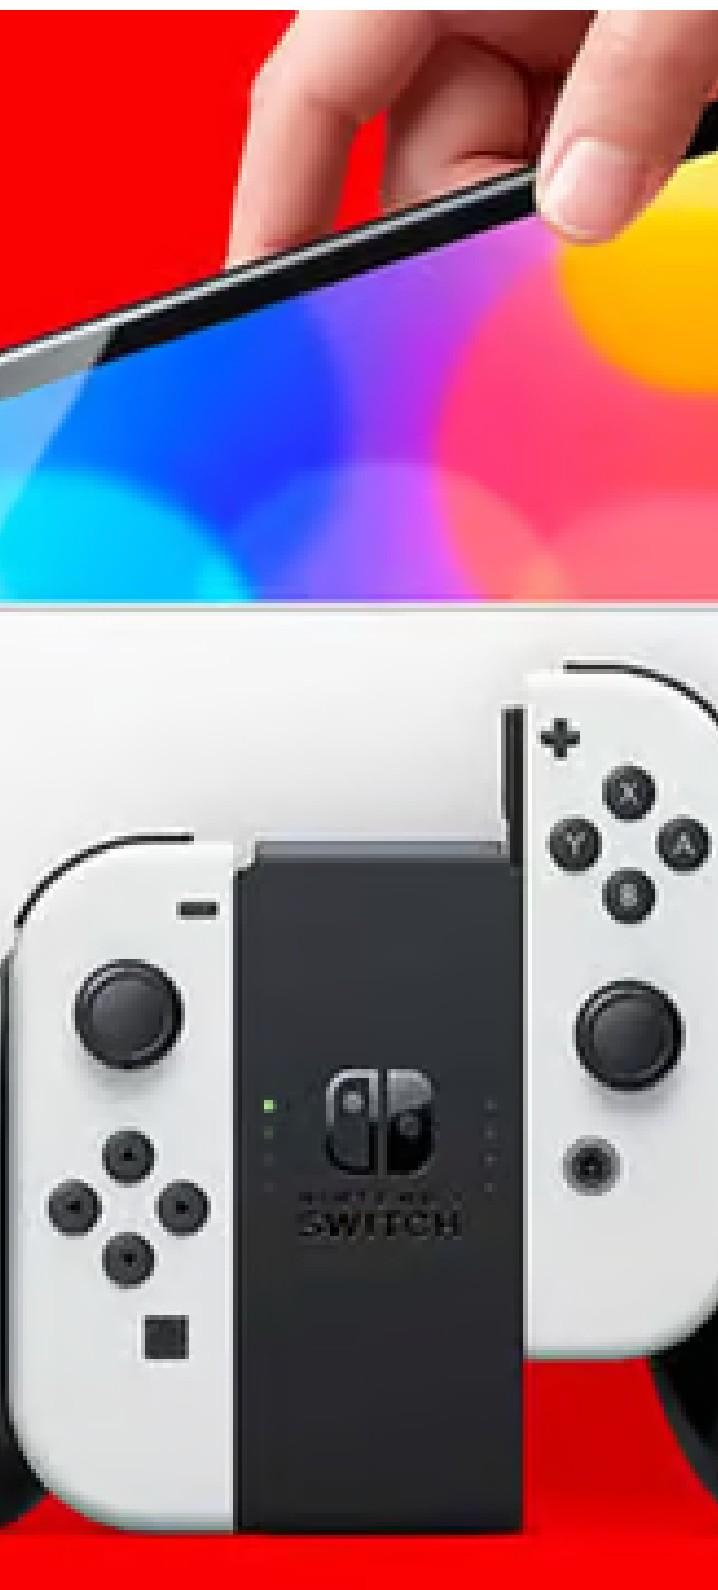 nintendo switch oled model being placed in dock with joycon controller in front.